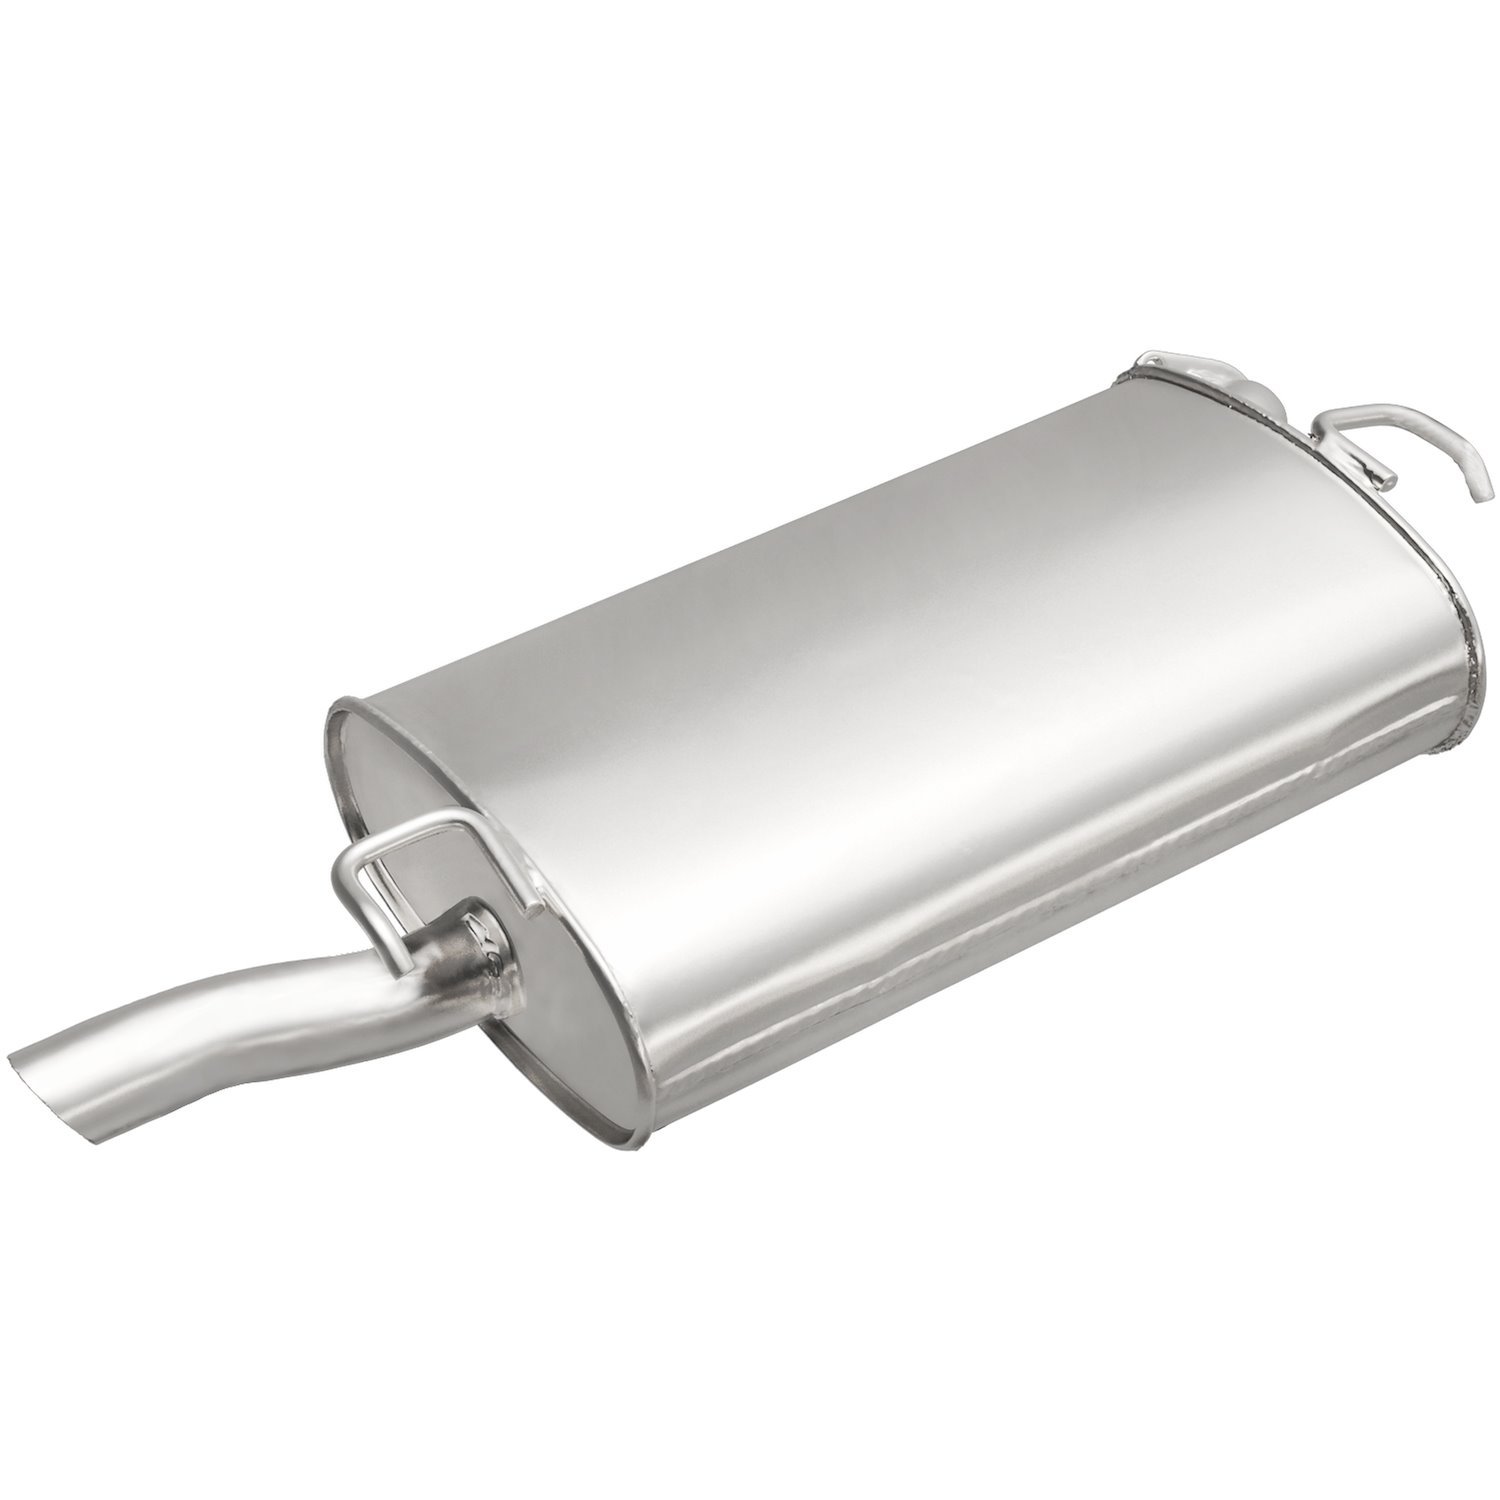 Direct-Fit Exhaust Muffler, 1997-2001 Toyota Camry 3.0L